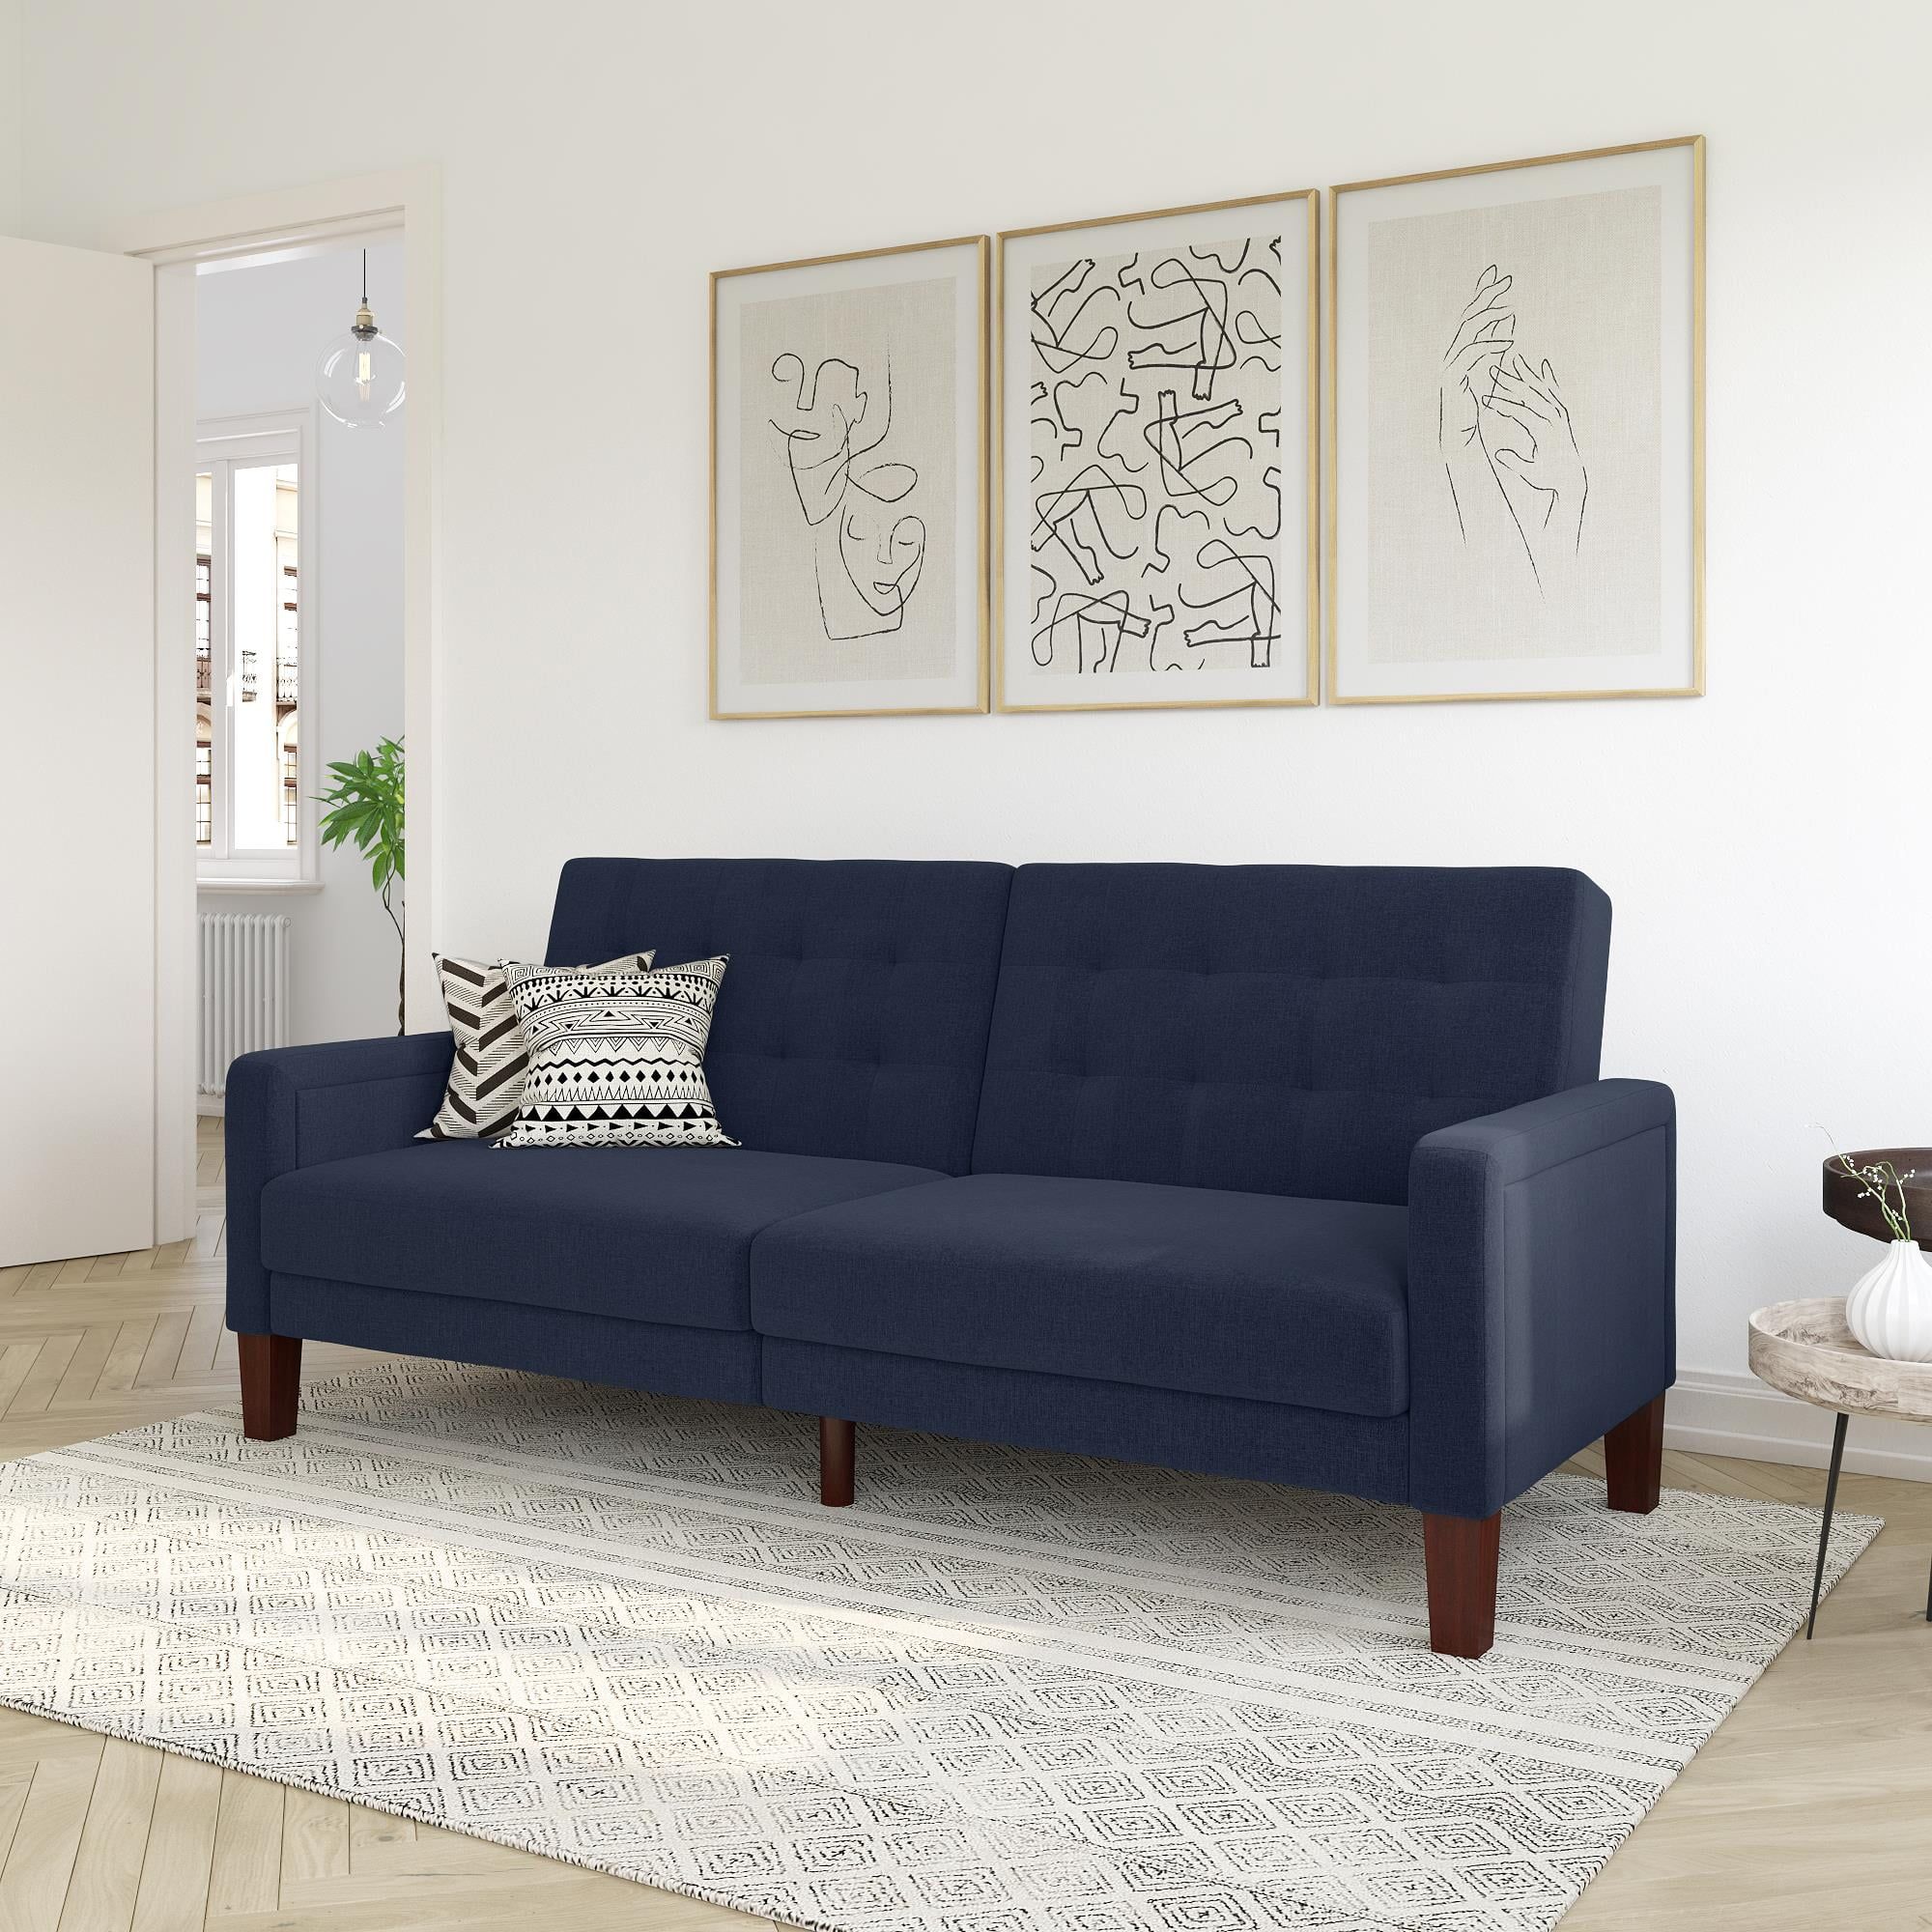 Better Homes & Gardens Porter Fabric Tufted Futon, Navy Linen – Walmart With Navy Linen Coil Sofas (View 10 of 15)